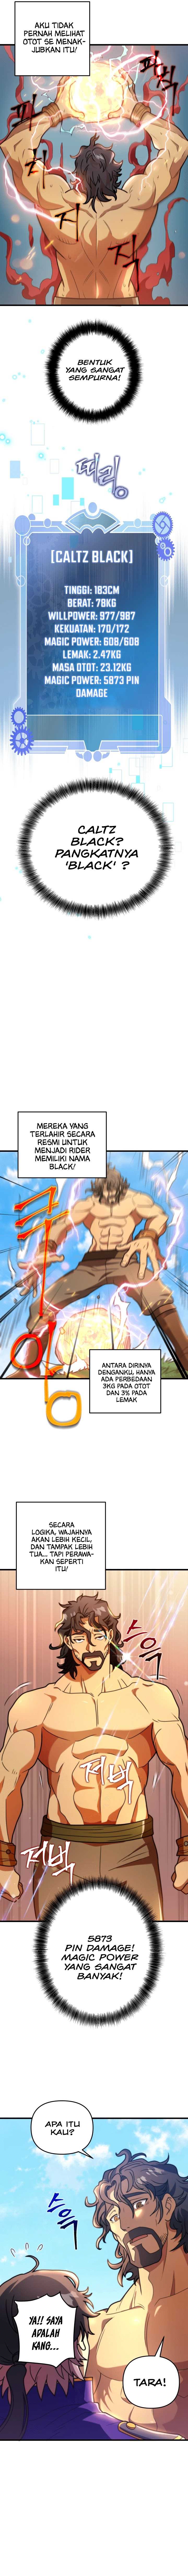 1RM’s Gigant Rider Chapter 02